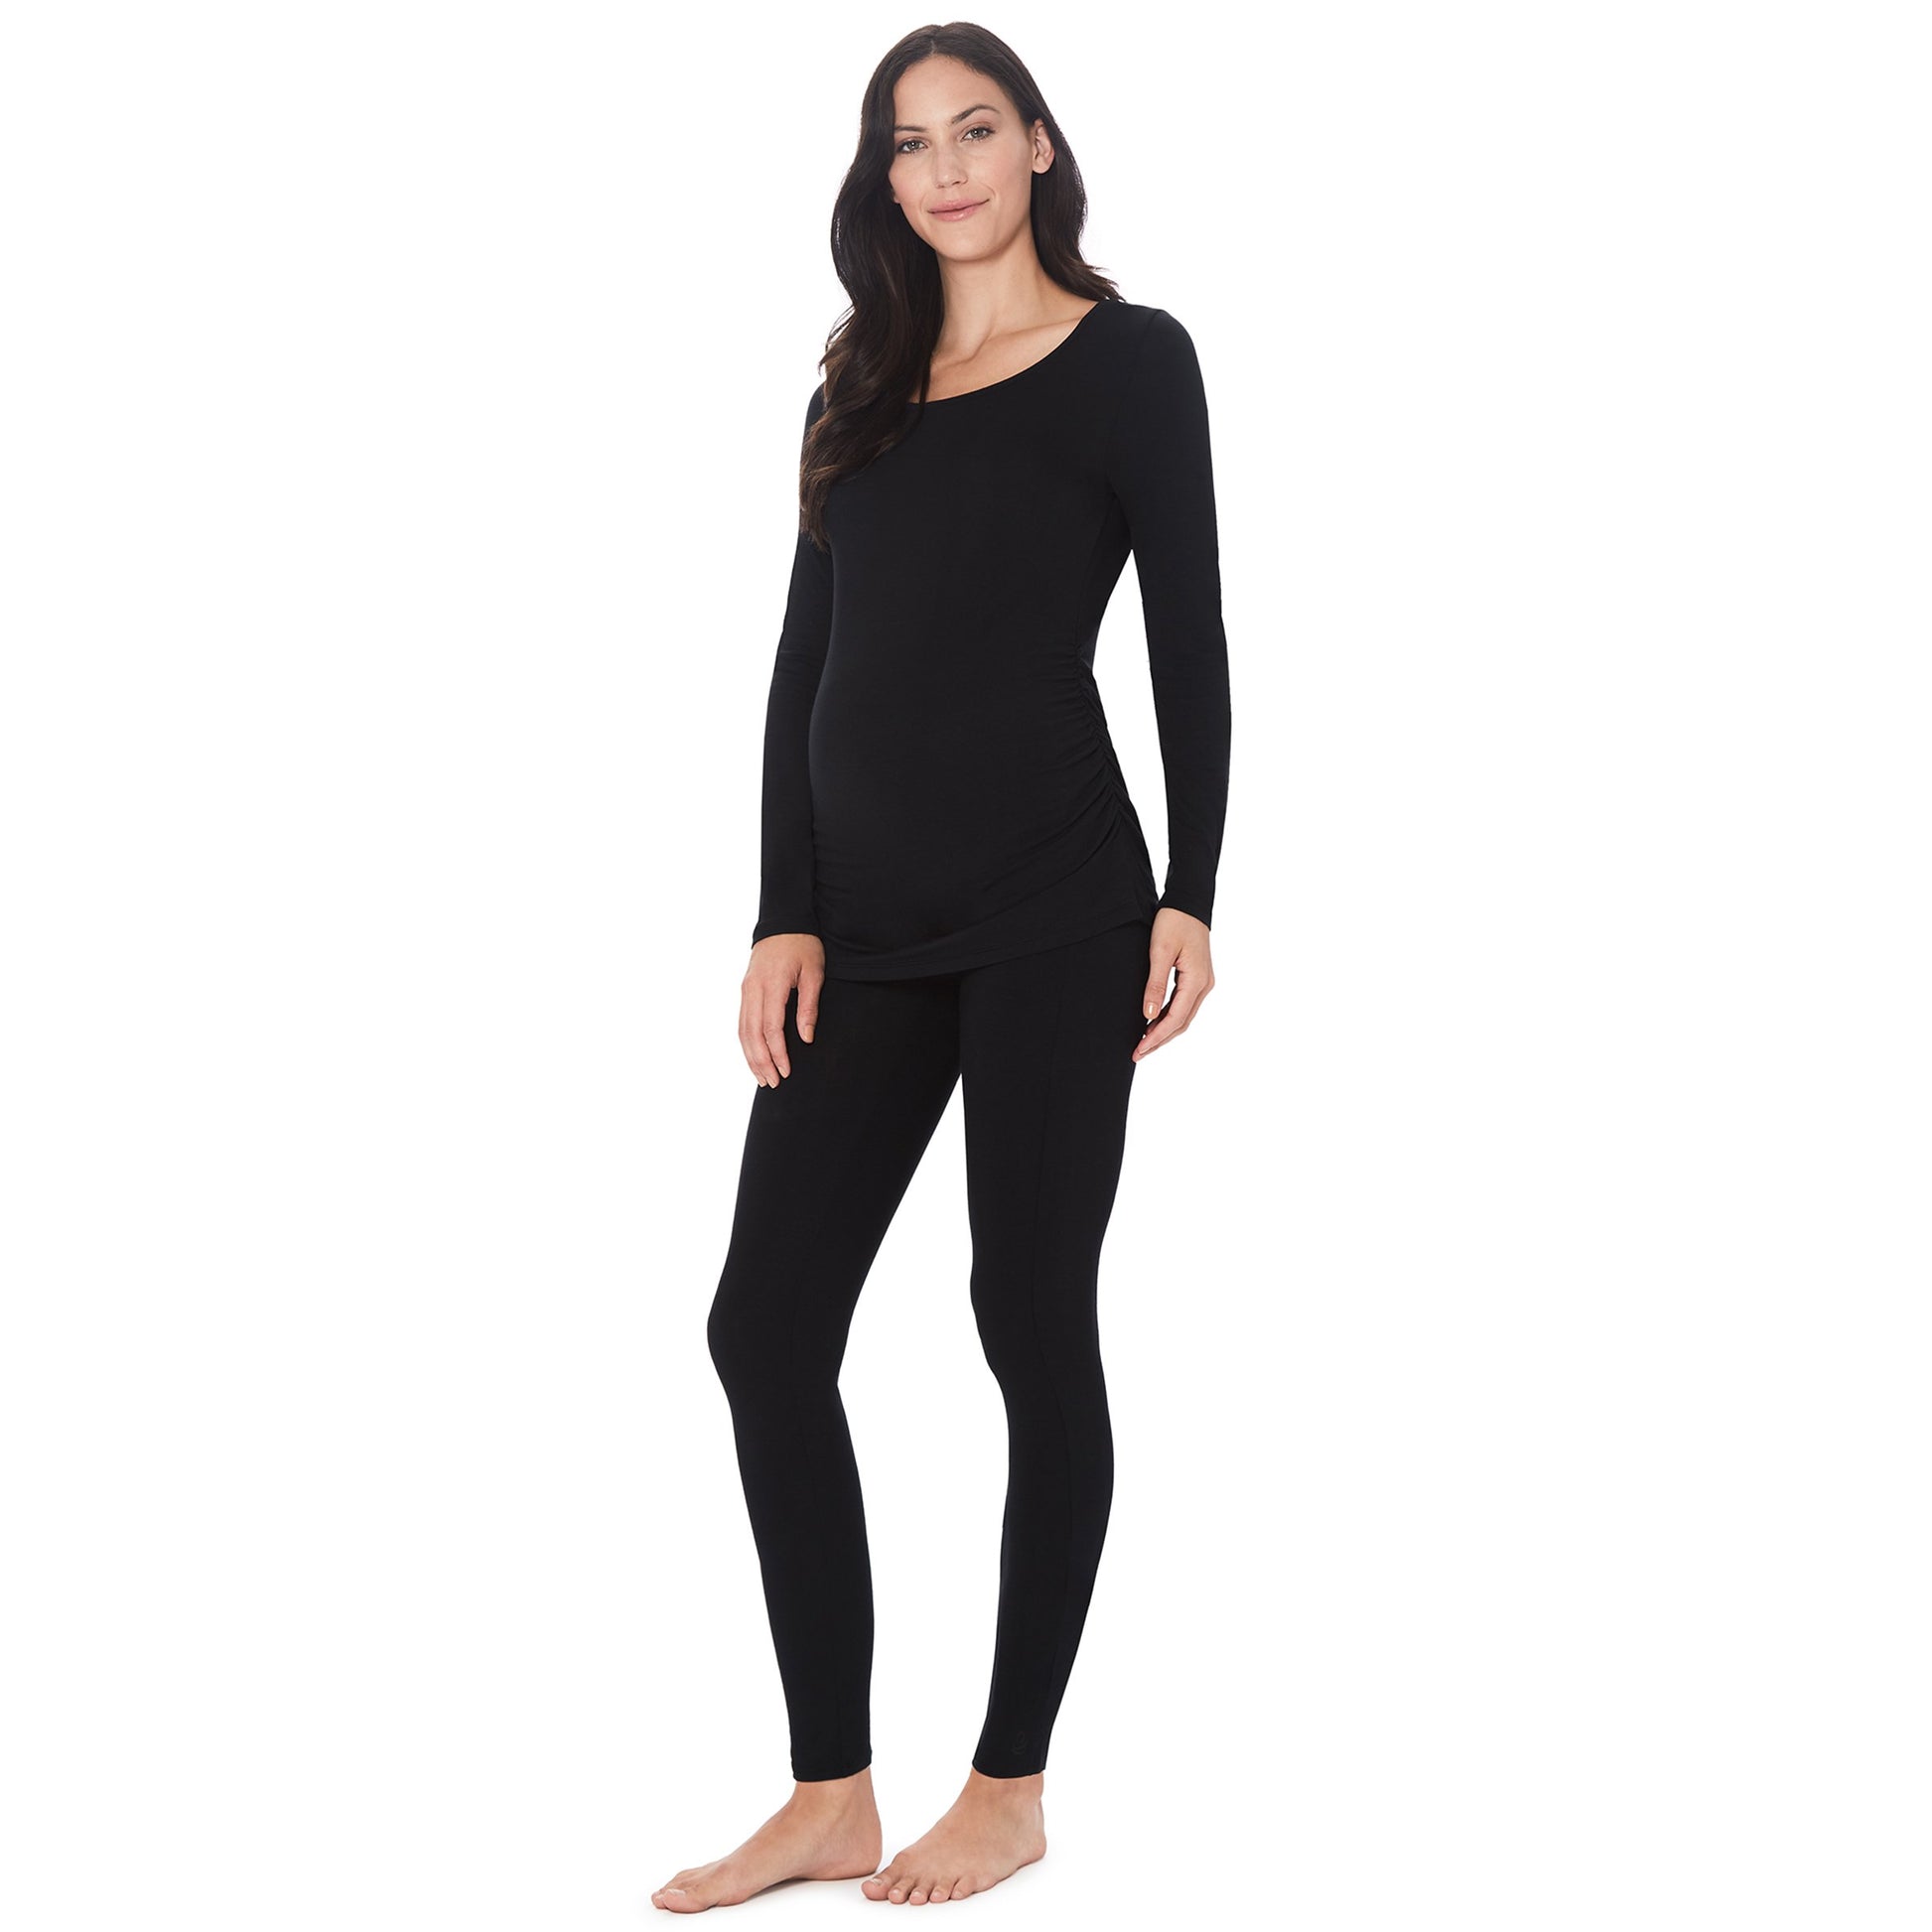 Black;Model is wearing a size S. She is 5’11”, Bust 34”, Waist 30.5”, Hips 40”.#Model is wearing a maternity bump.@ A lady wearingSoftwear with Stretch Maternity Ballet Neck Top with Black print